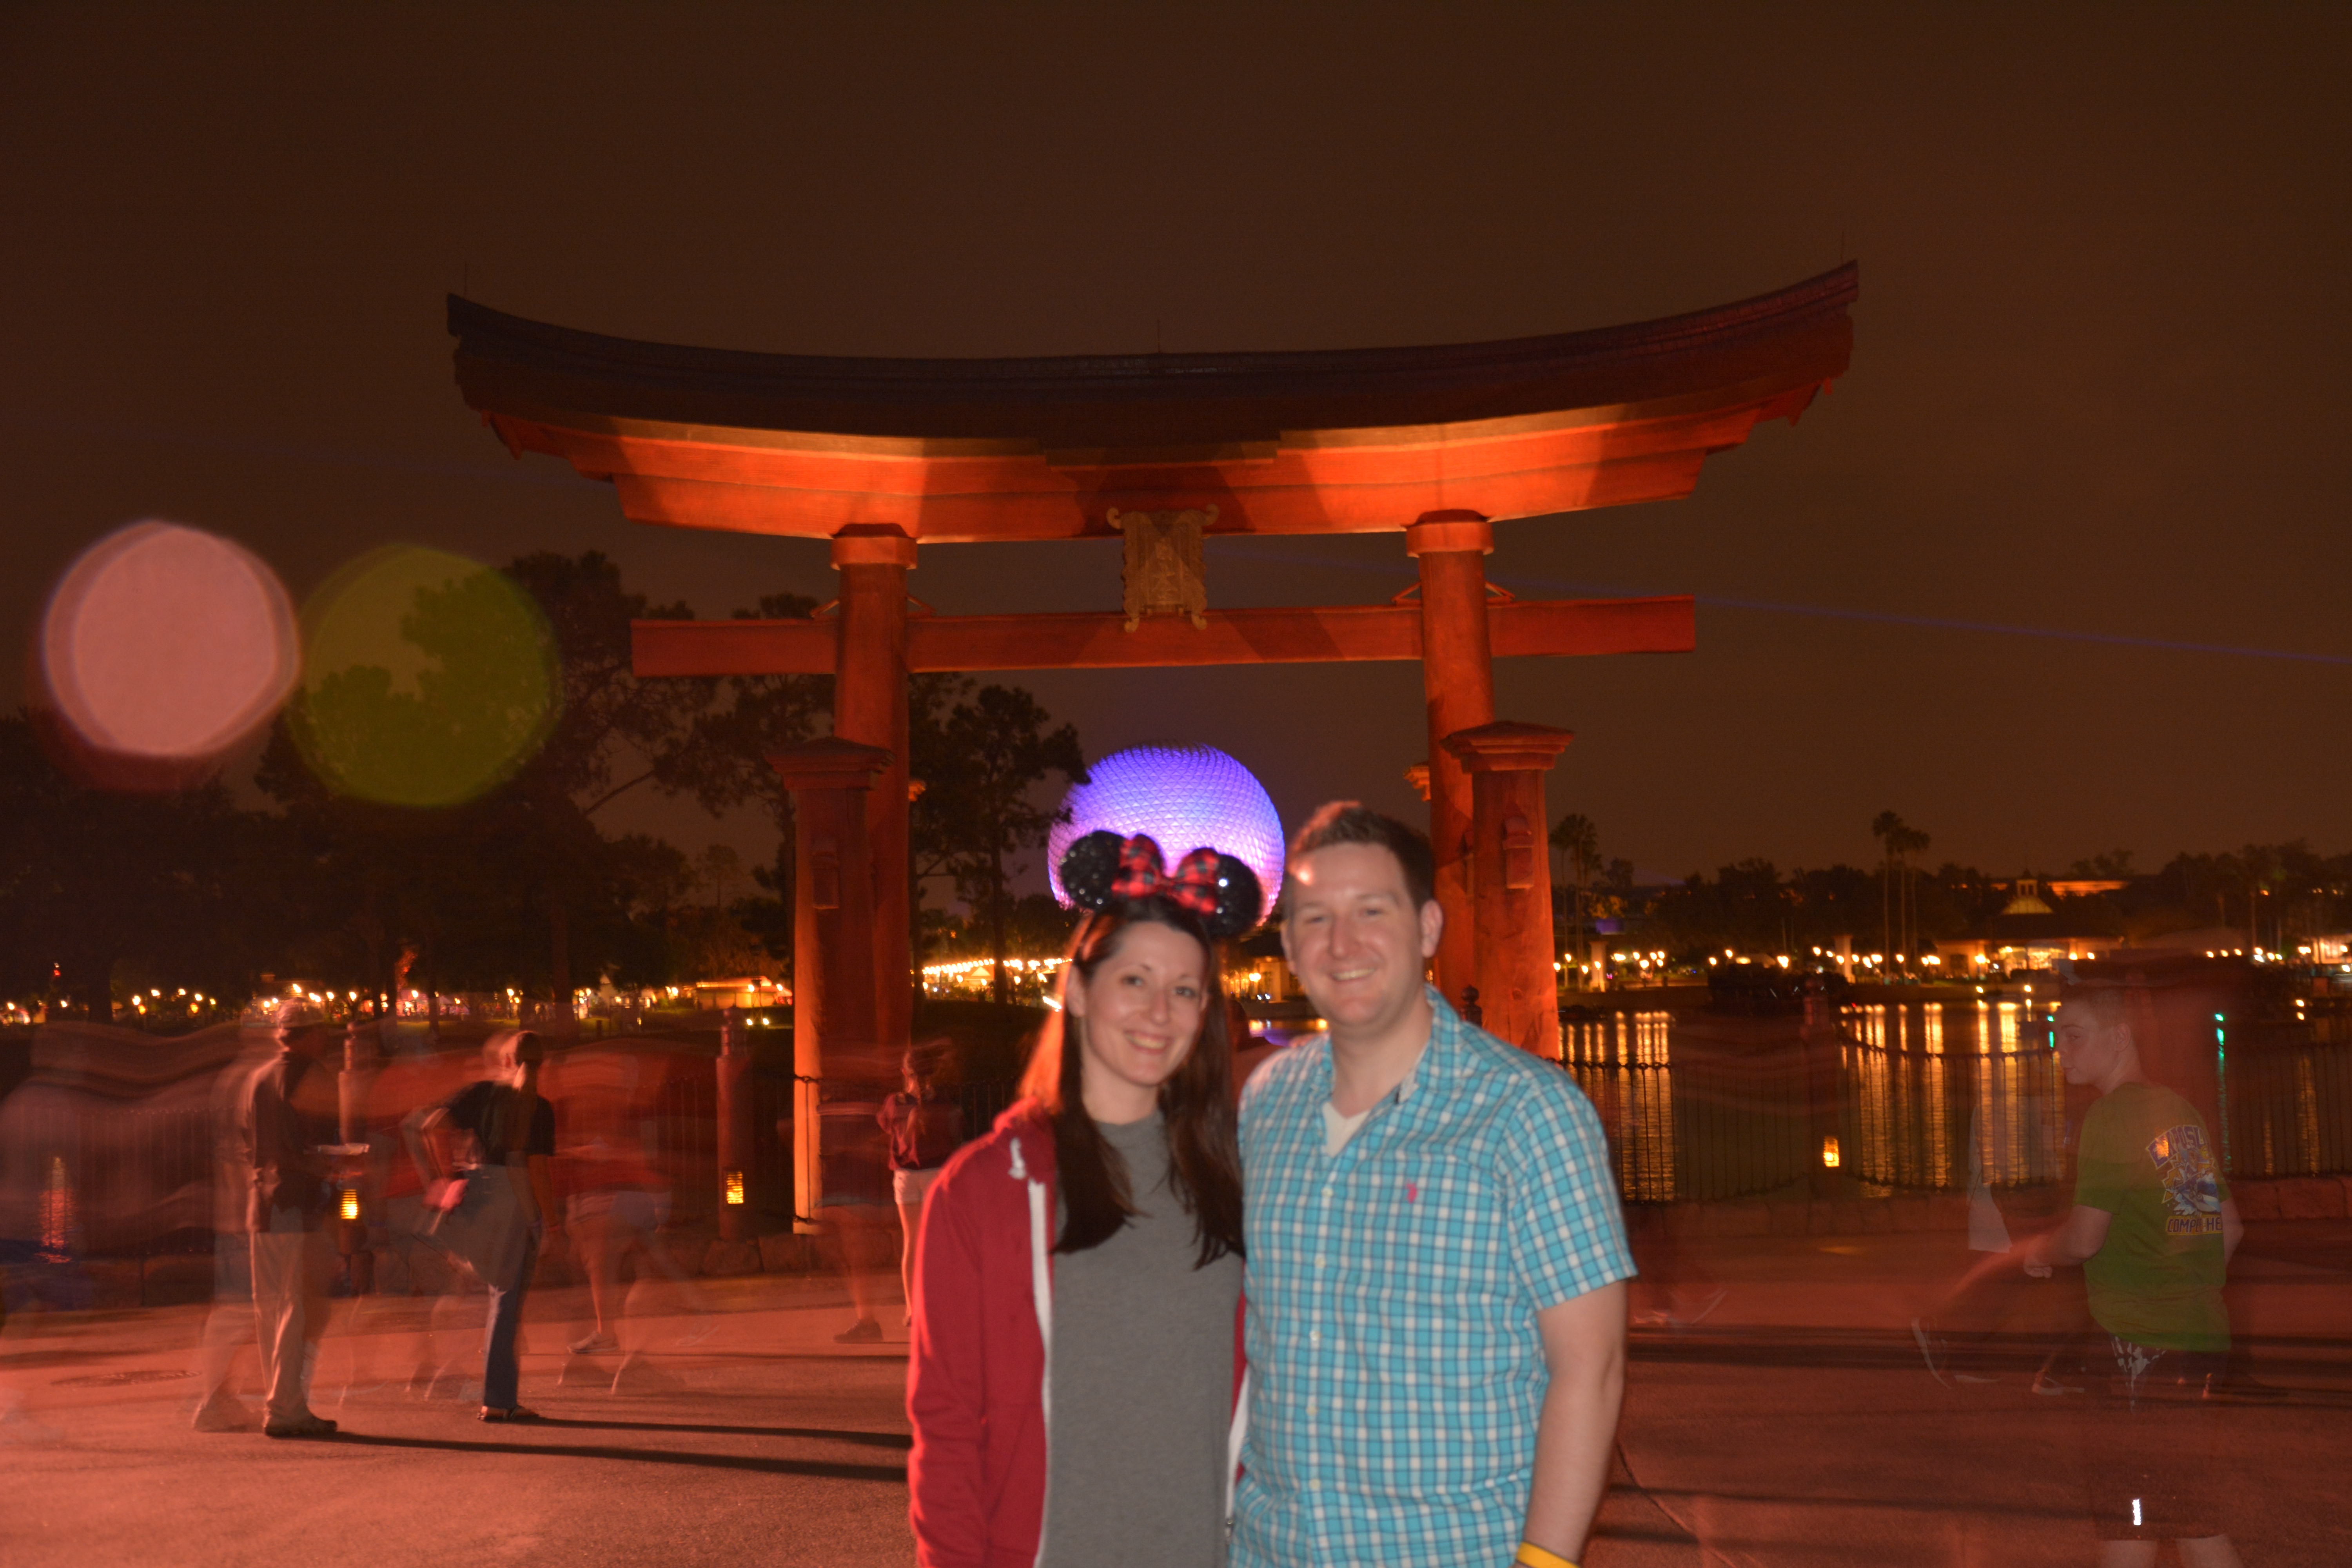 Ryan and Lauren in Japan at Epcot in front of the Torii